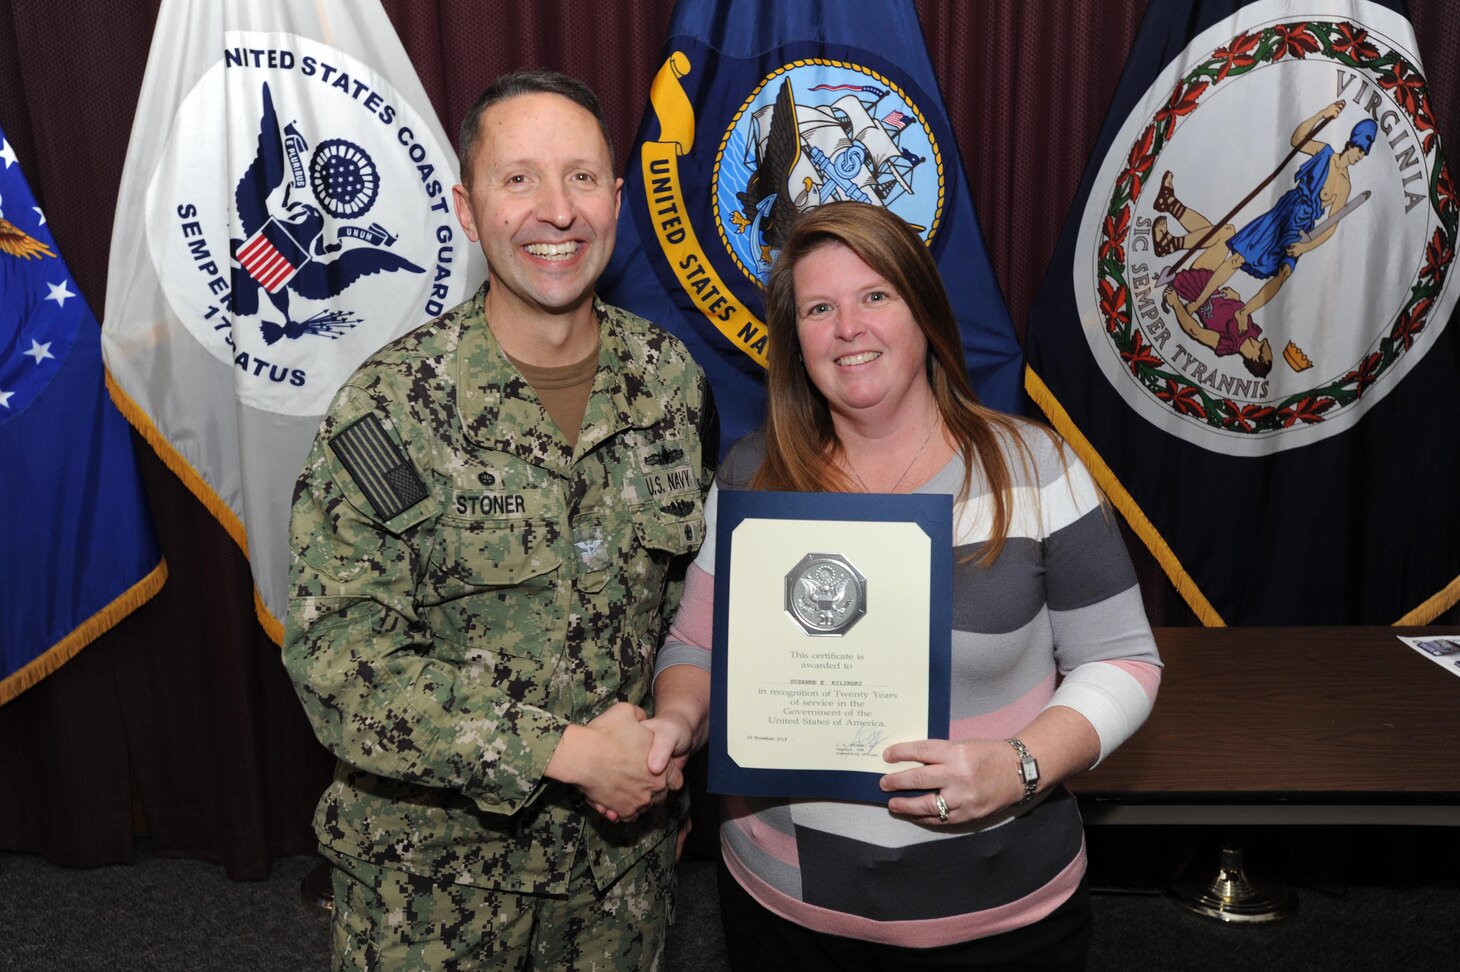 Center for Surface Combat Systems (CSCS) Commanding Officer, Capt. Dave Stoner, recognizes CSCS Financial Management Analyst Mrs. Suzie Kilinski for her 20 years of civilian service at an awards ceremony January 9, 2020.